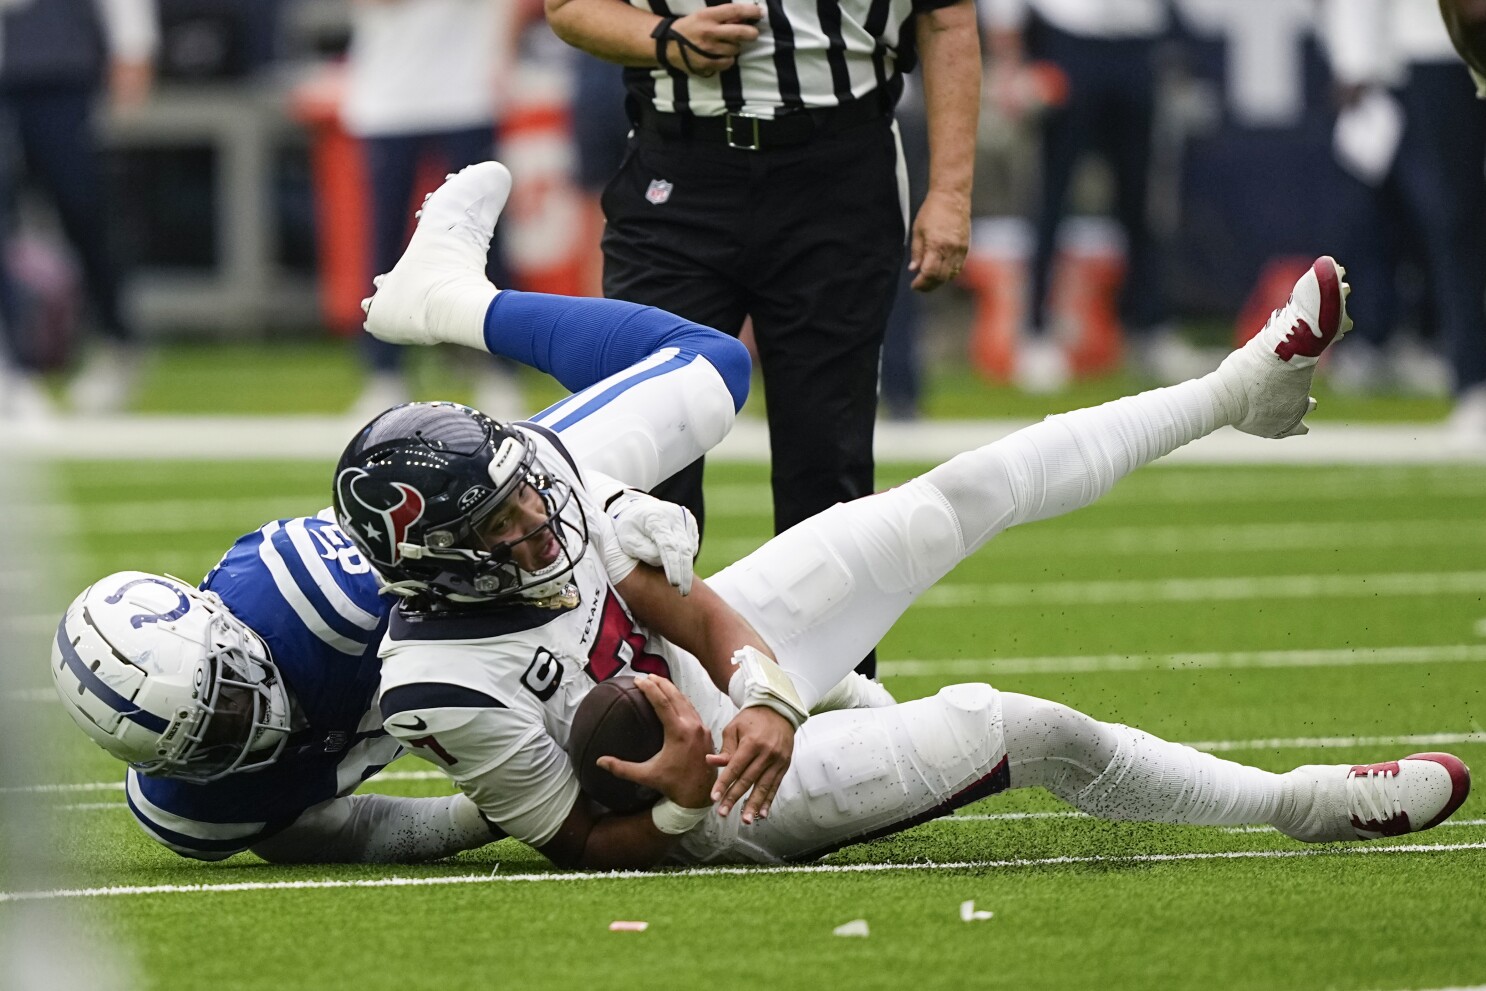 3 promising things from the final game of the season that Colts can build  on moving forward